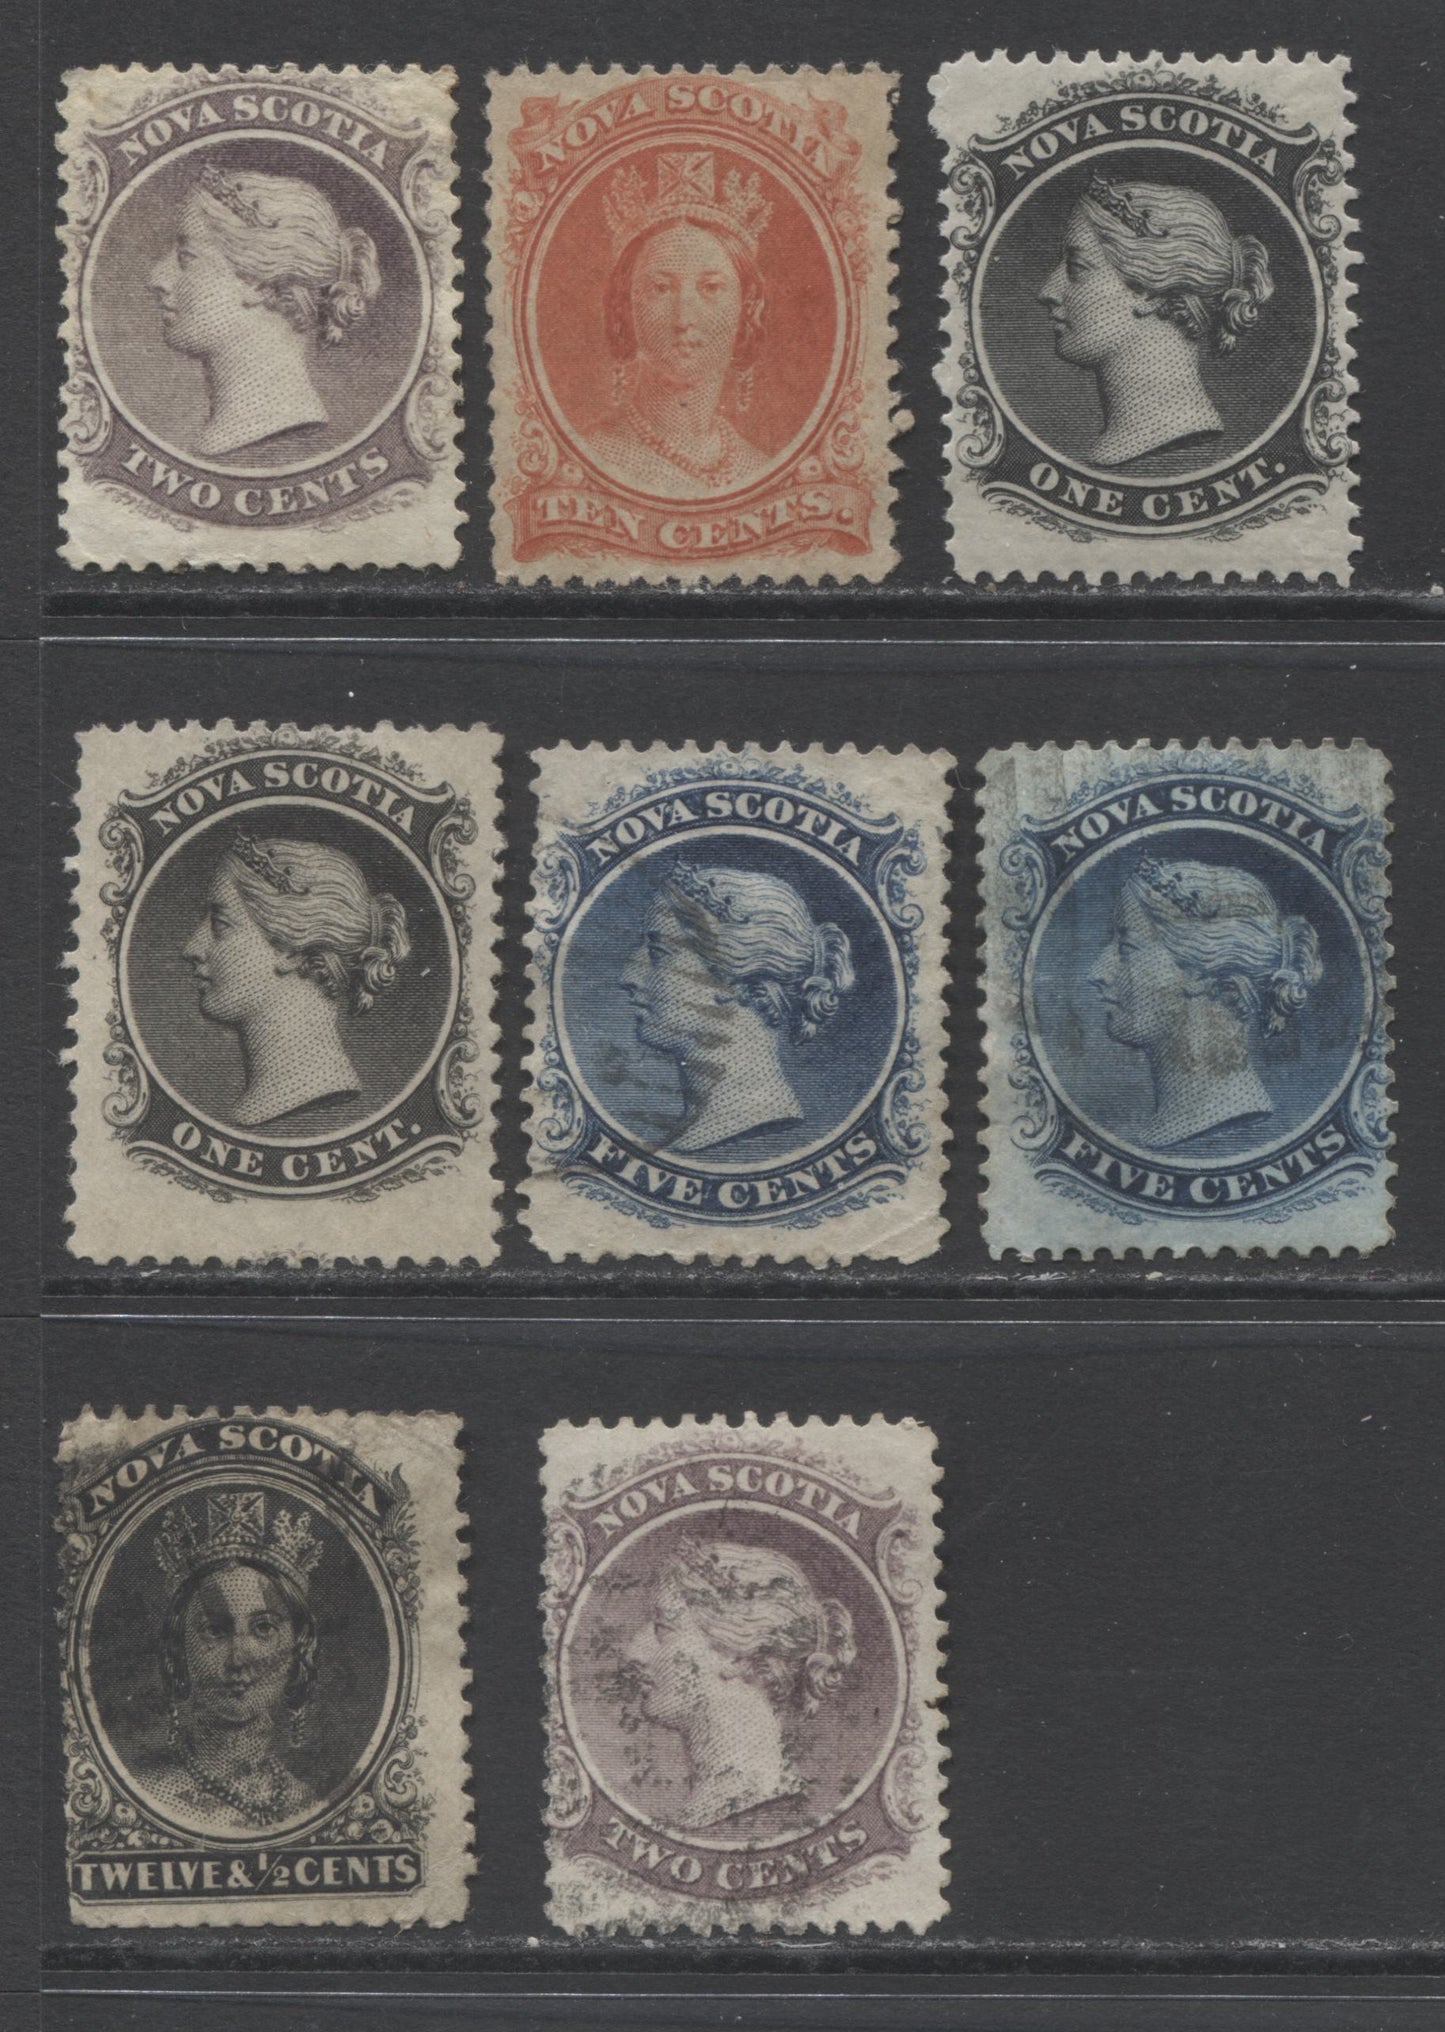 Lot 318 Nova Scotia #8-13 1c Black - 12.5c Black Queen Victoria, 1860-1863 Cents Issue, 8 Fair-Fine Used, OG & Unused Singles, Different Shades and Papers